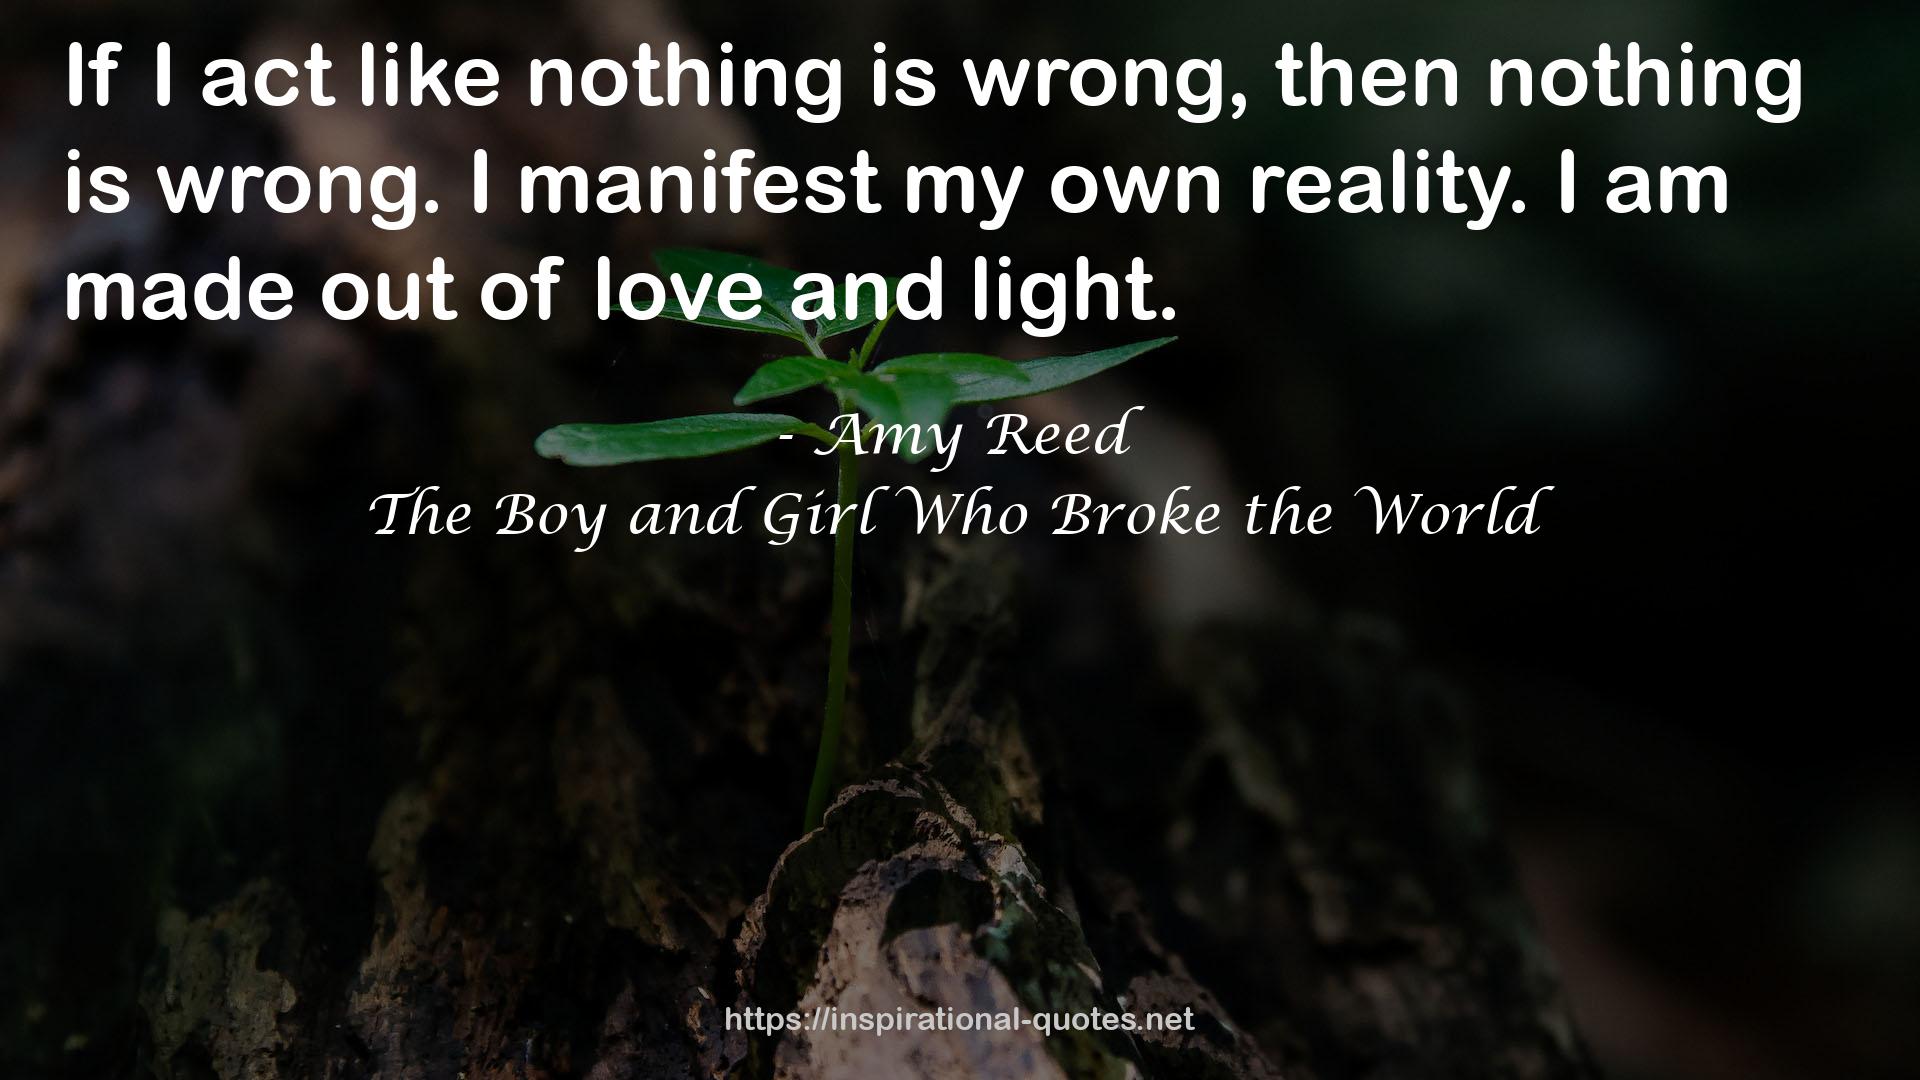 The Boy and Girl Who Broke the World QUOTES